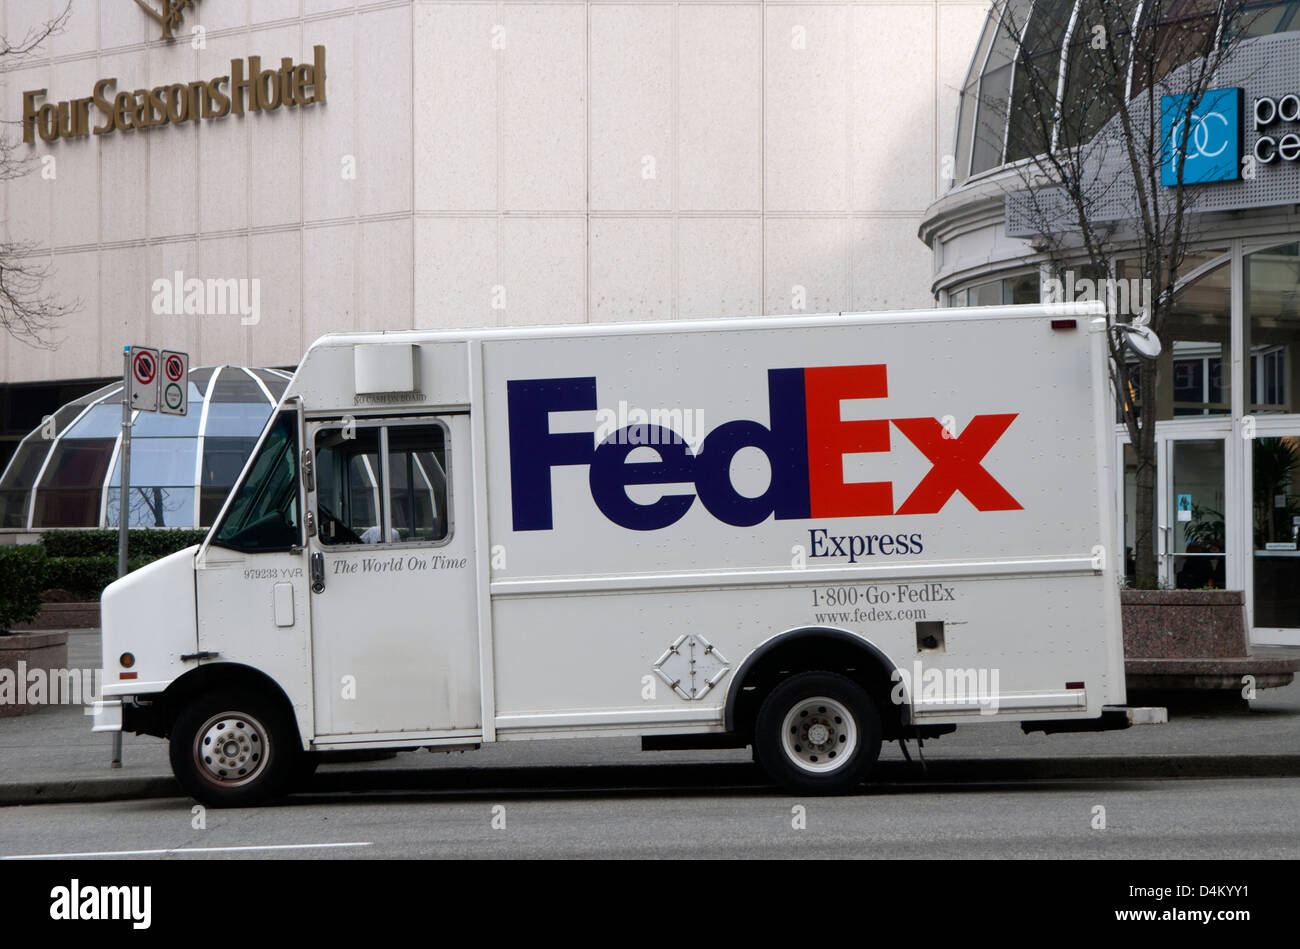 FedEx Express truck parked outside the Four Seasons Hotel, Stock Photo